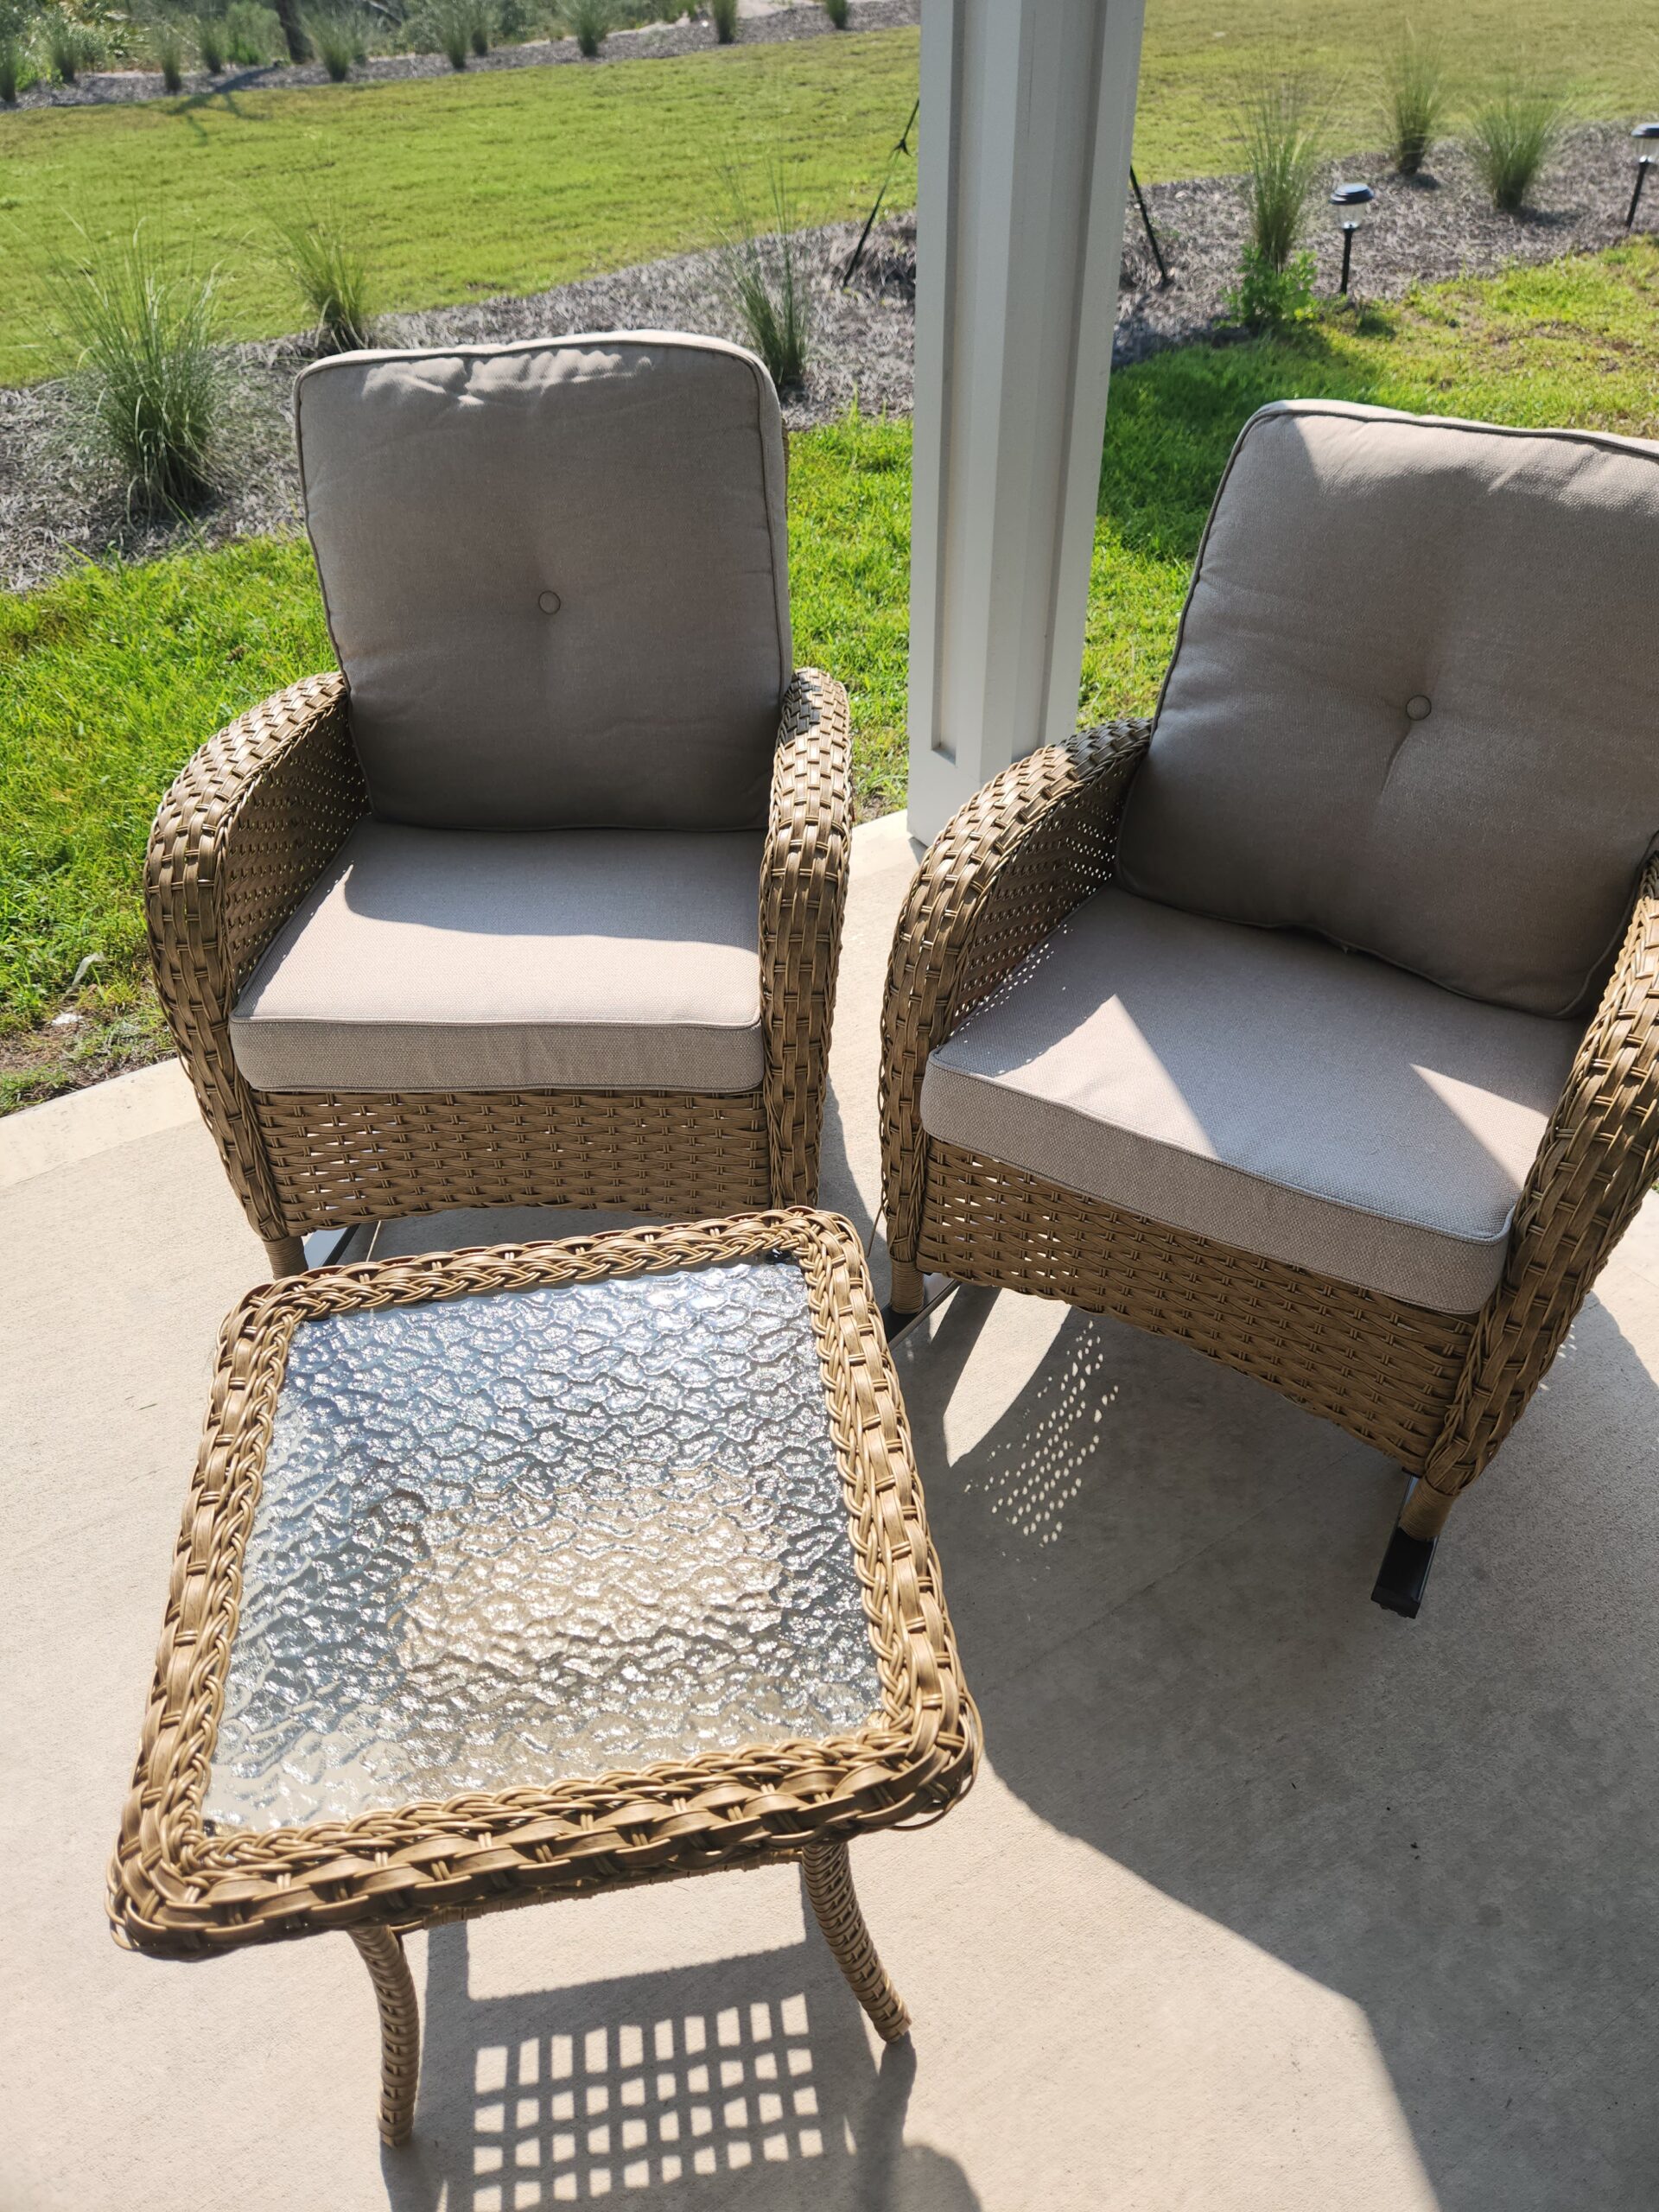 HIGH QUALITY Patio Wicker Rocking Chair set with Table